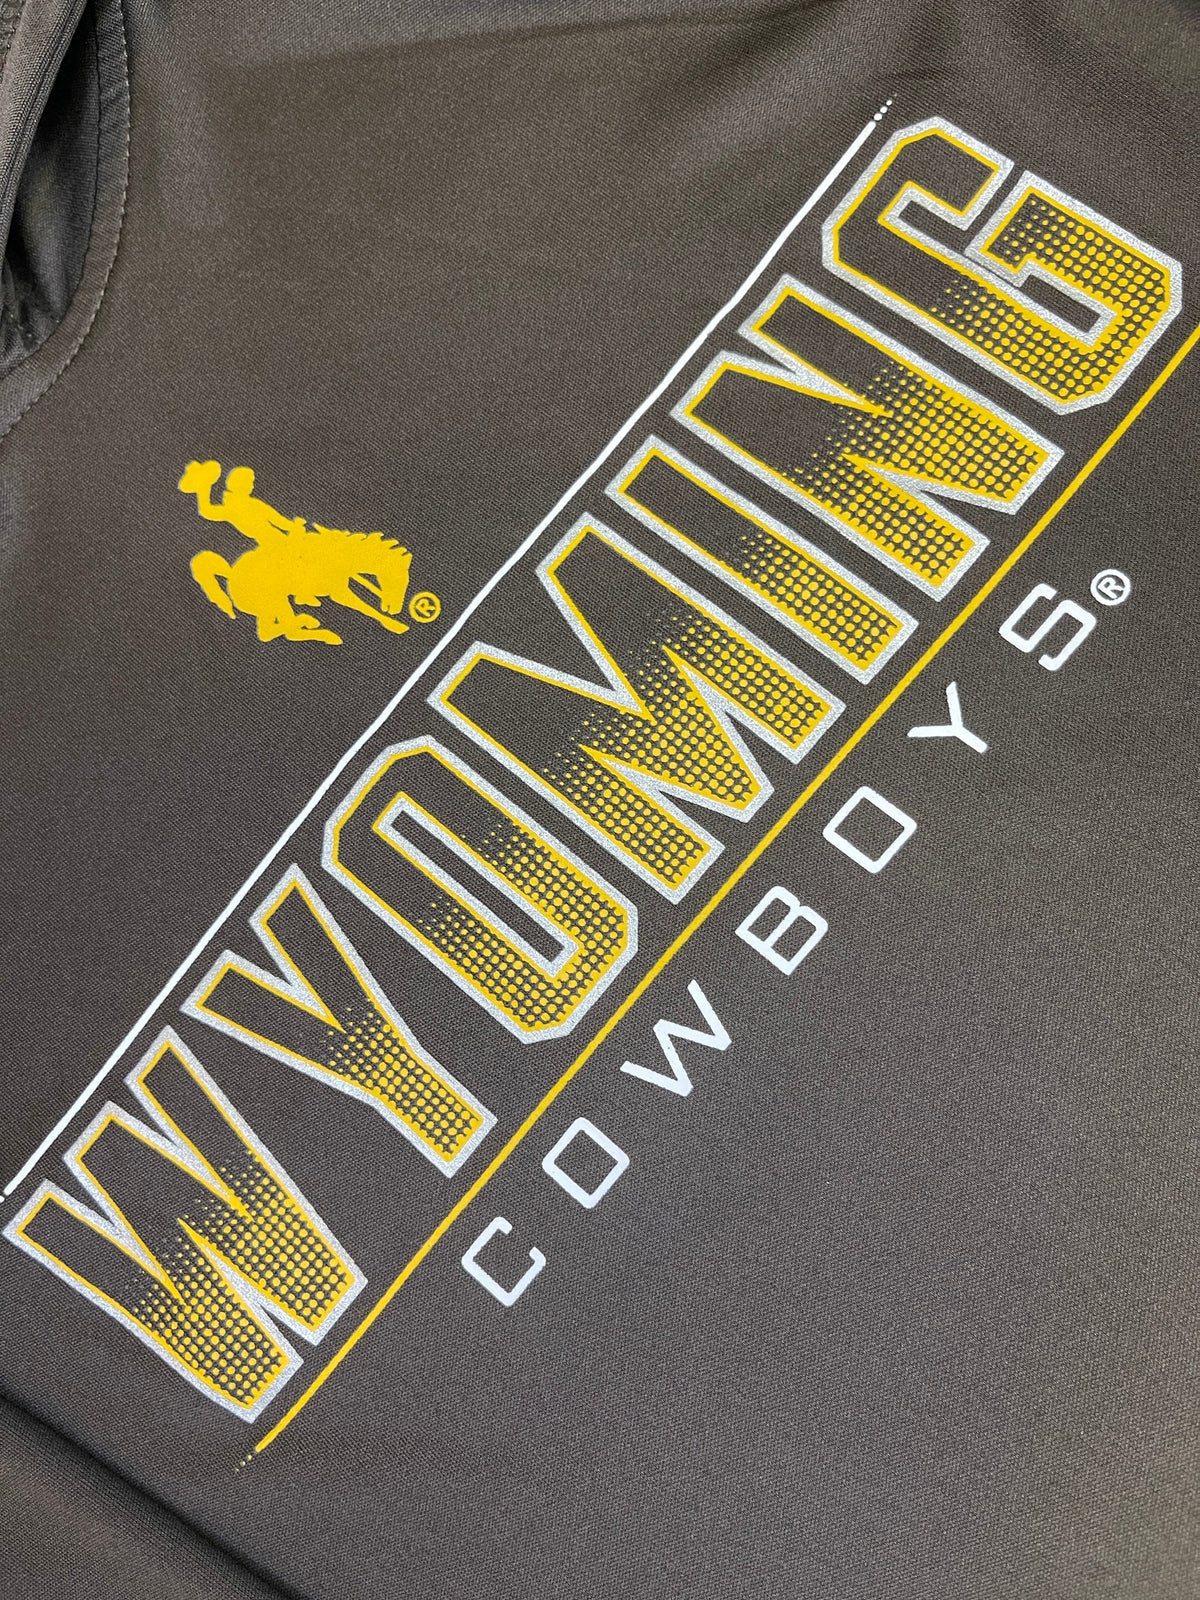 NCAA Wyoming Cowboys Russell Wicking L/S T-Shirt Hoodie Youth X-Small 4-5